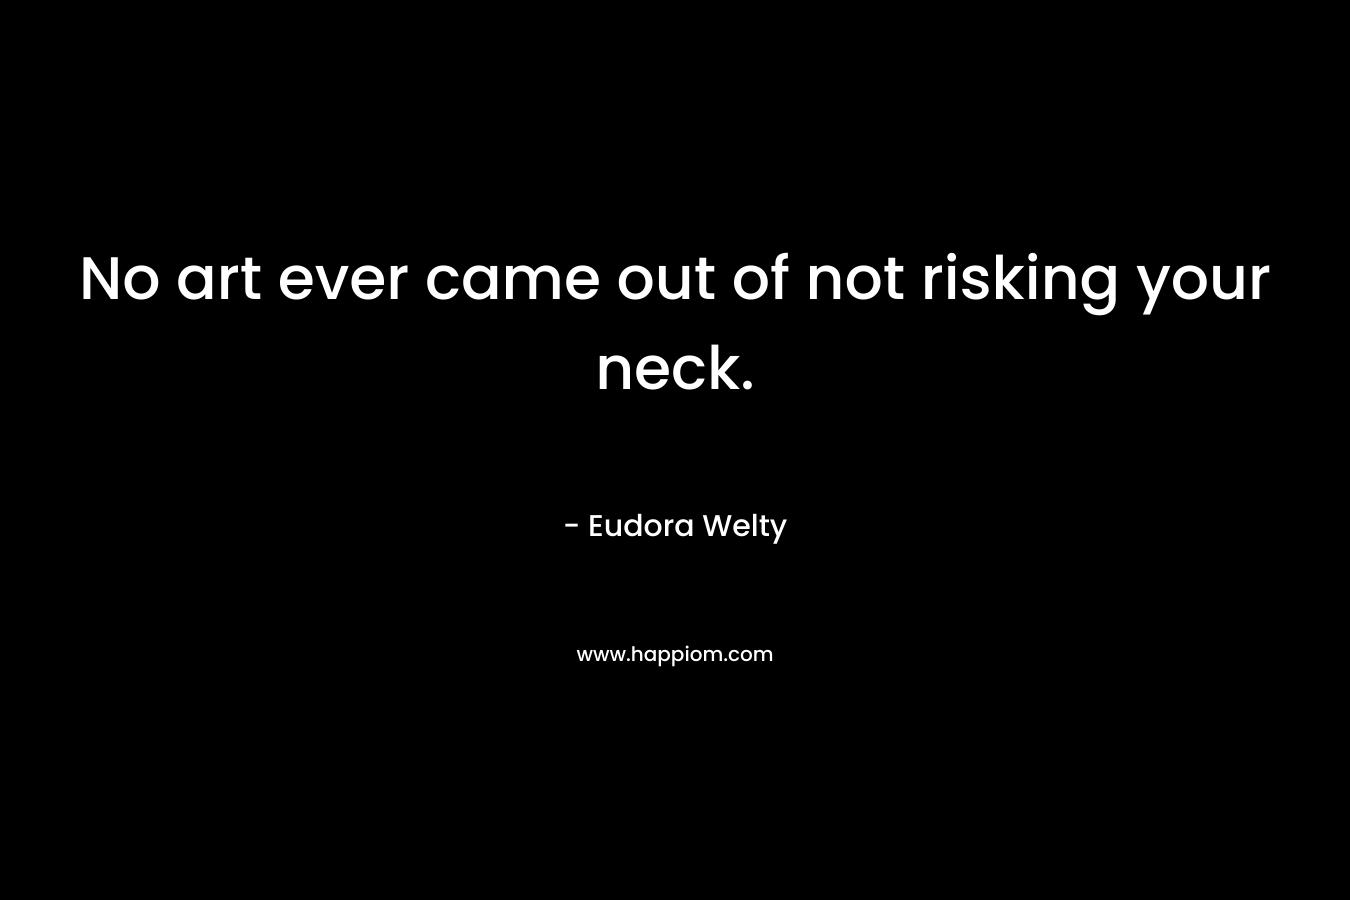 No art ever came out of not risking your neck. – Eudora Welty